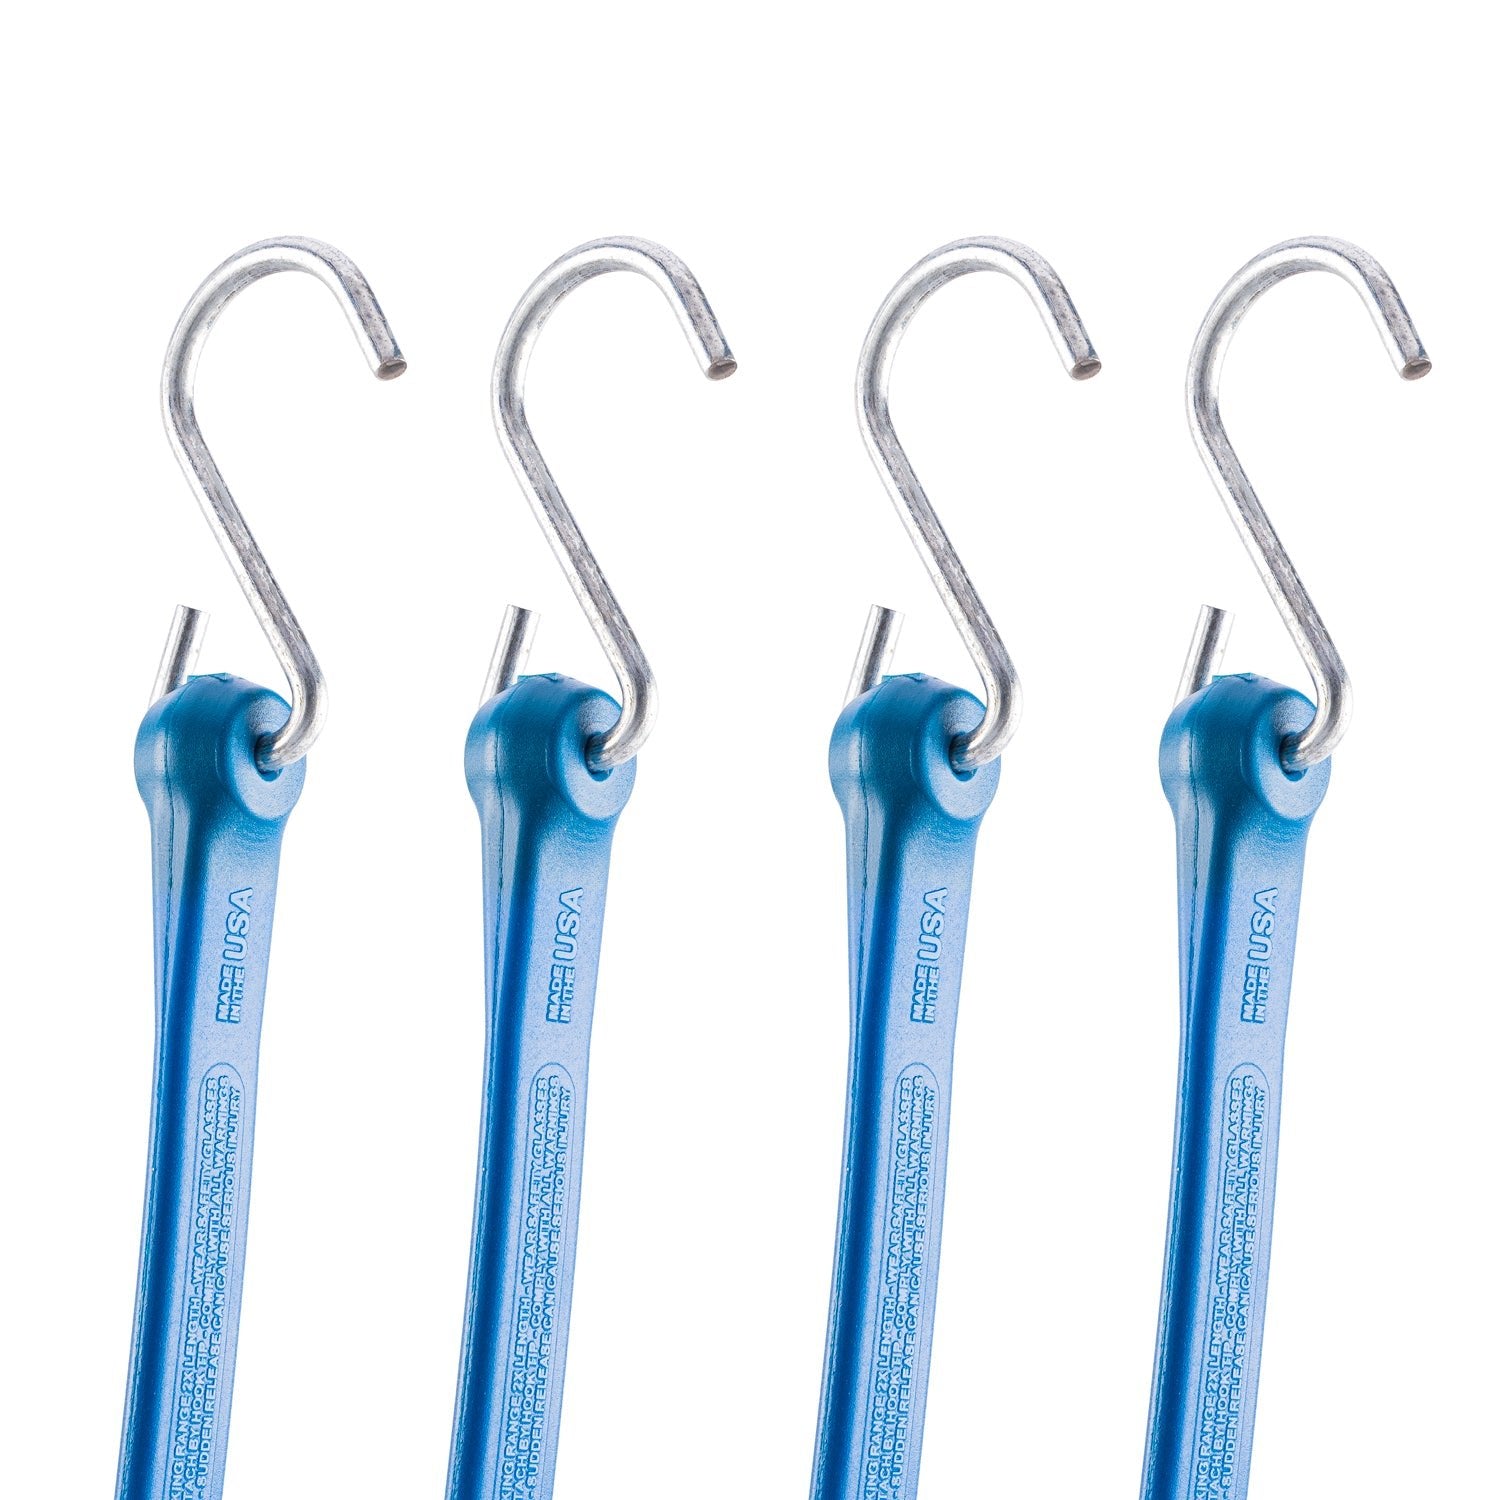 STAINLESS STEEL BUNGEE/SHOCK MARINE GRADE HEAVY DUTY SPRING HOOK - 4 SIZES  TO CHOOSE FROM MADE (IN THE USA)